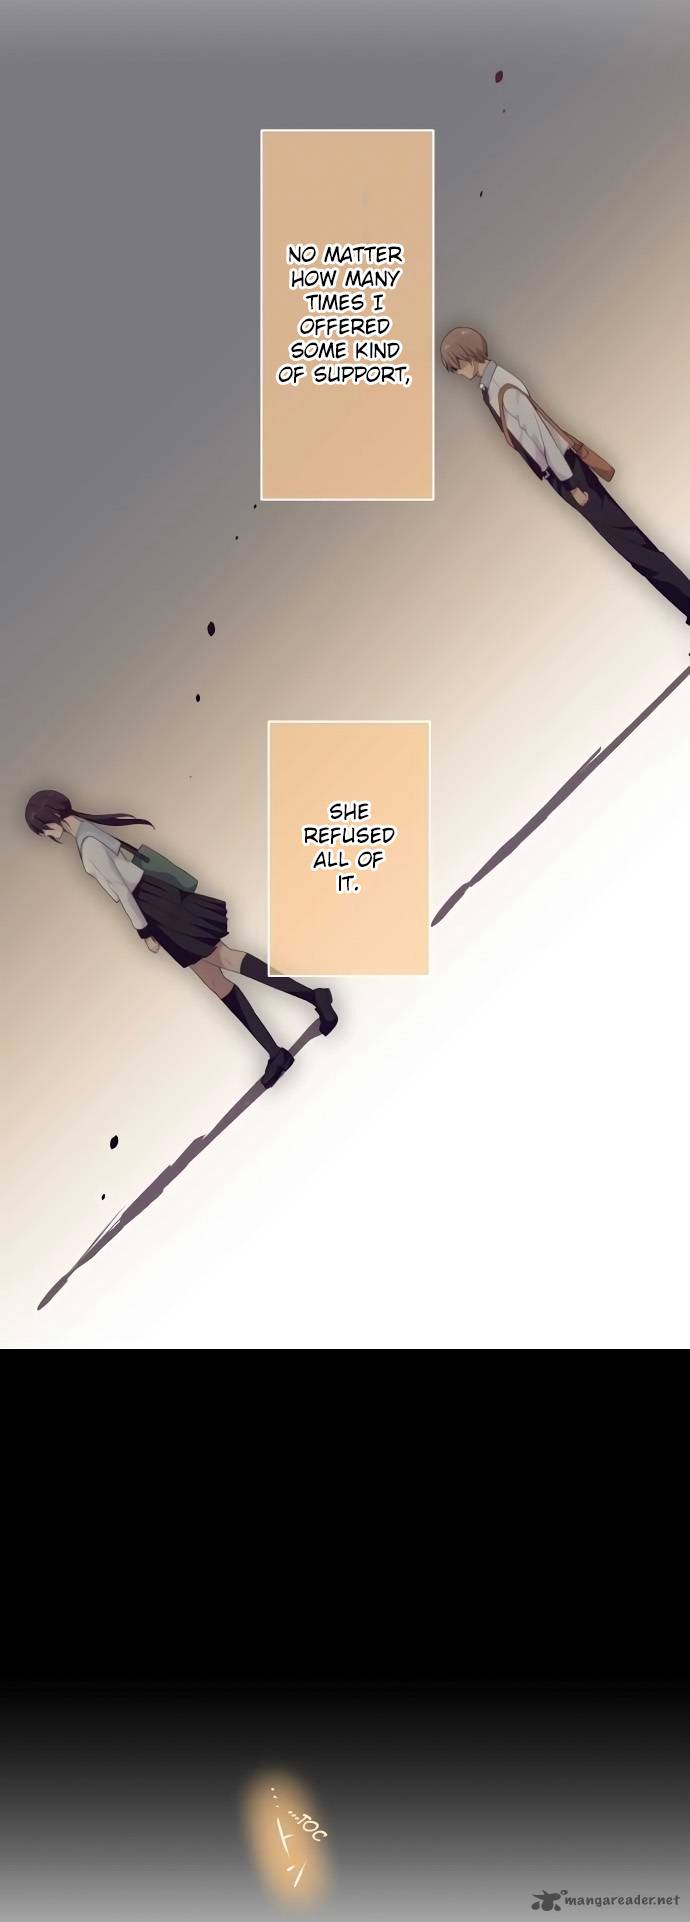 Relife 114 7